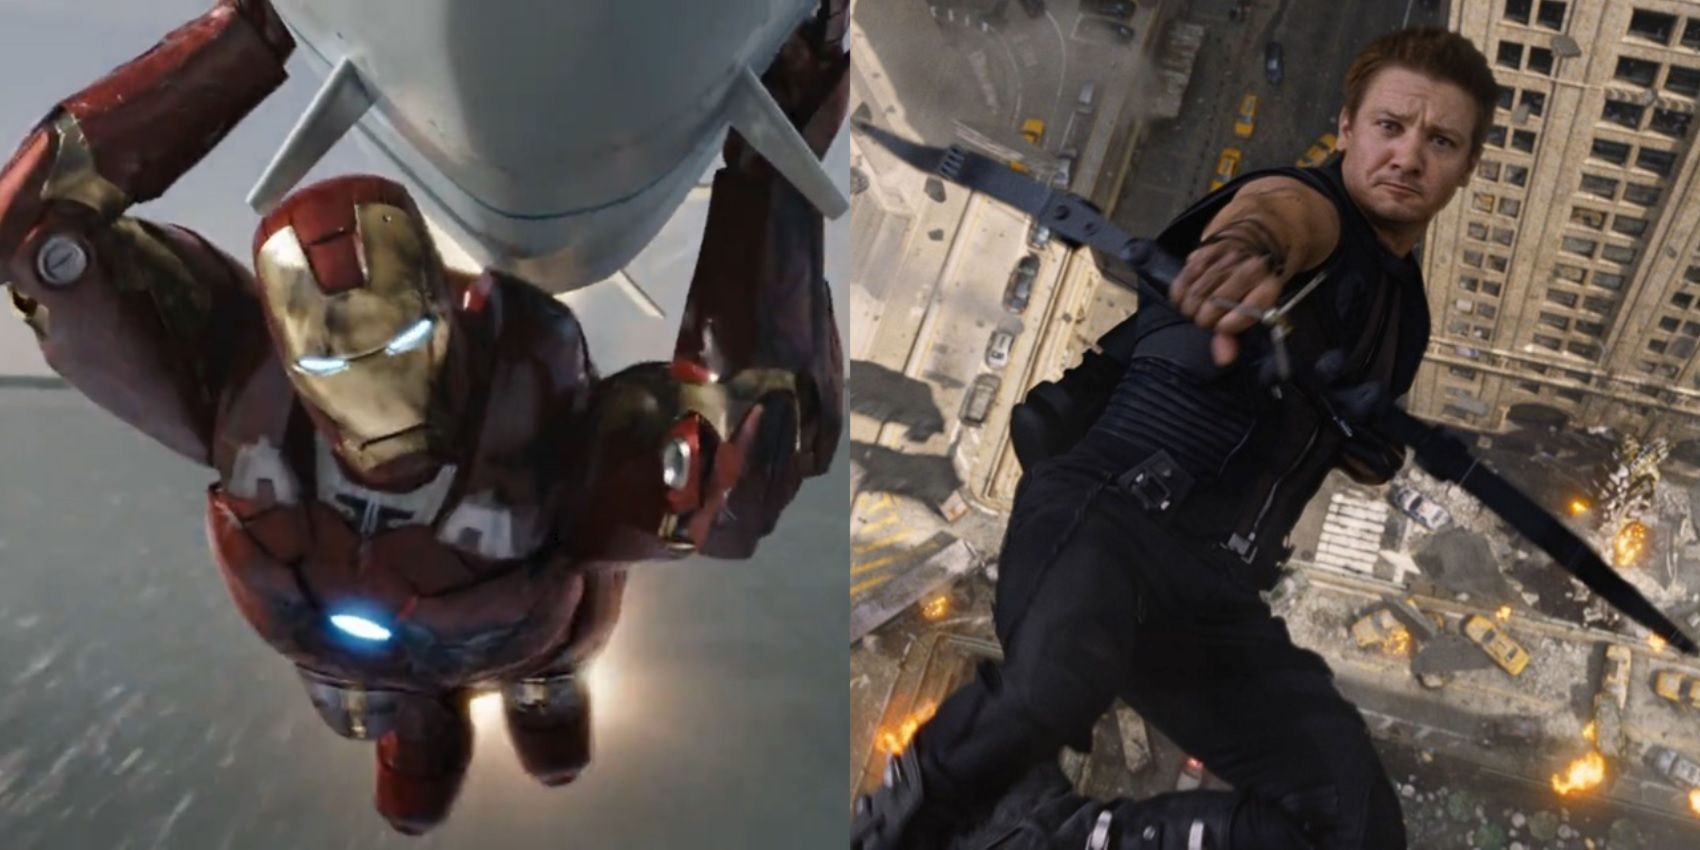 Split image of Iron Man carrying a nuke and Hawkeye shooting an arrow in The Avengers